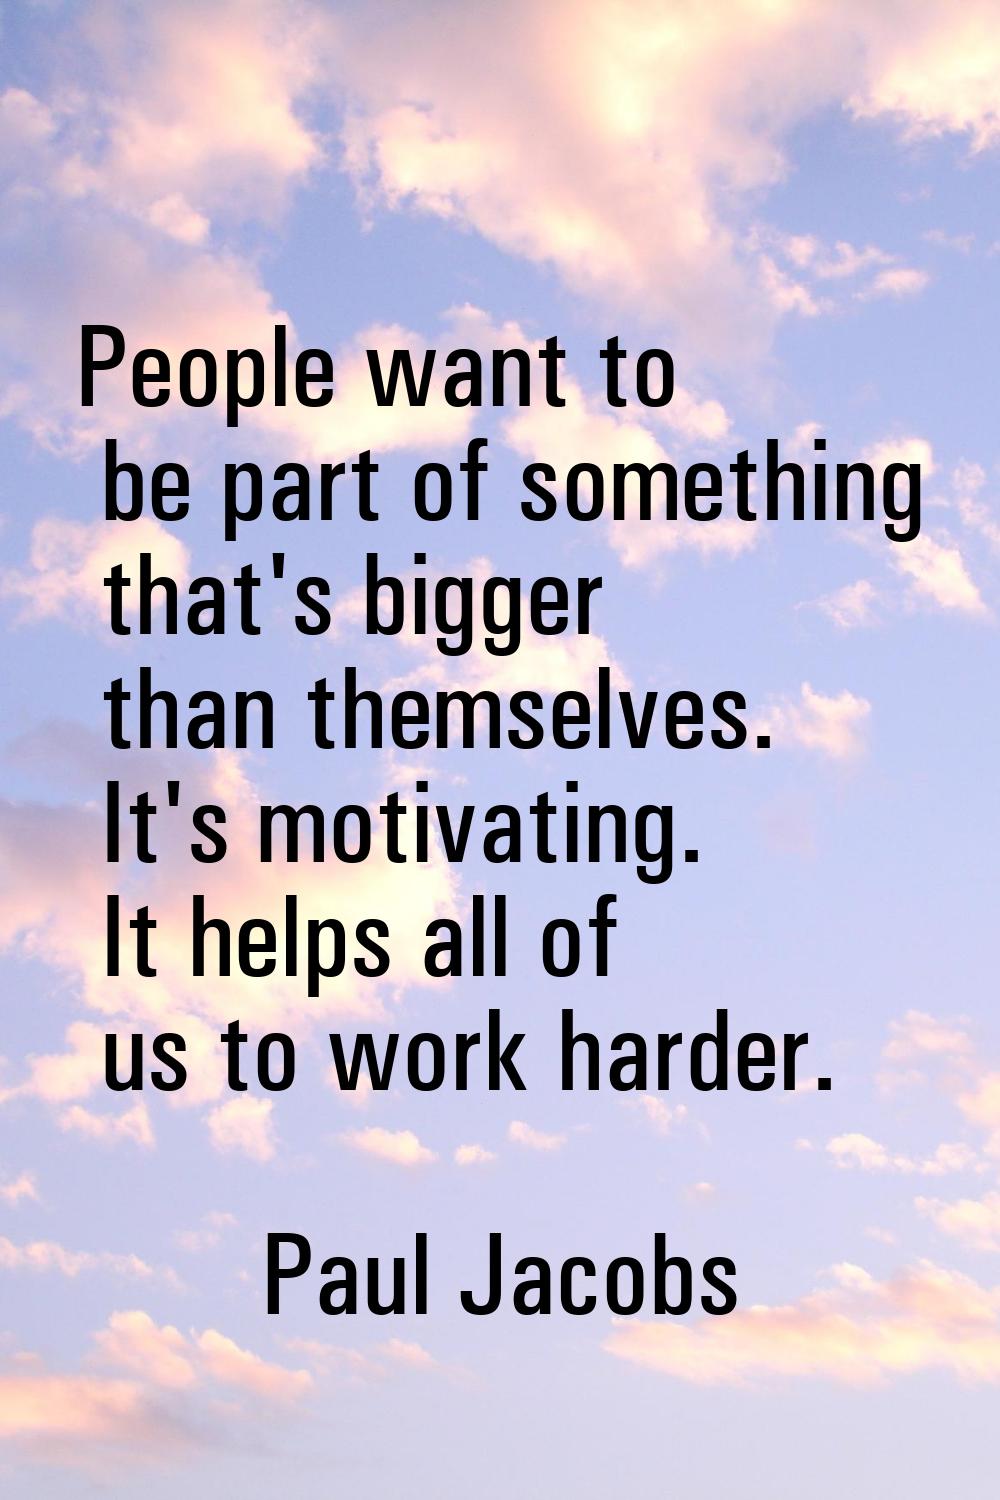 People want to be part of something that's bigger than themselves. It's motivating. It helps all of